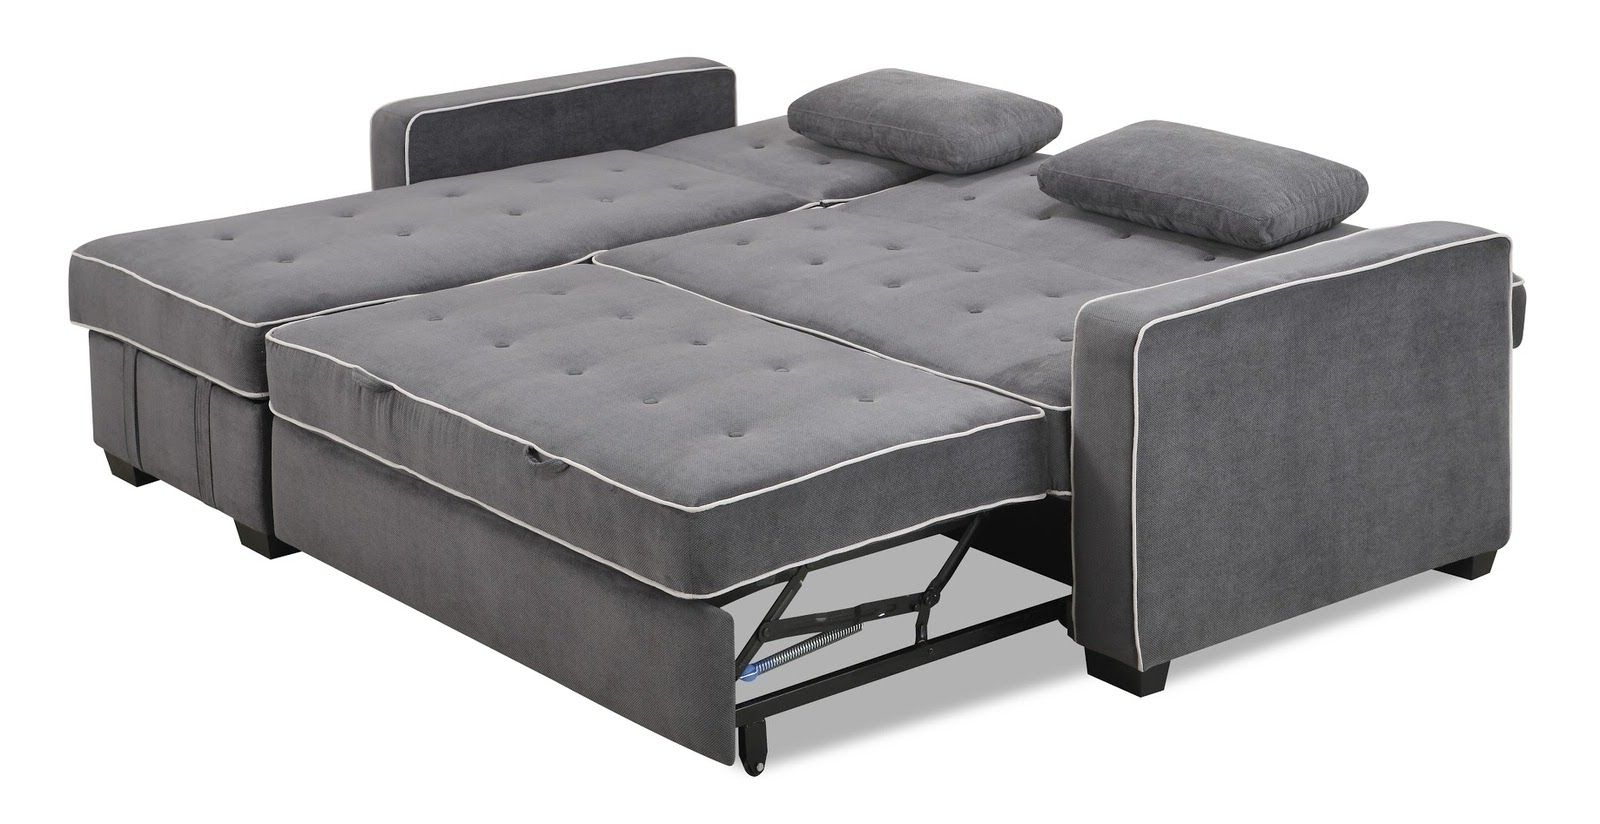 Augustine Sectional Moon Greyserta / Lifestyle Pertaining To 2018 Sofa Chaise Convertible Beds (View 2 of 15)